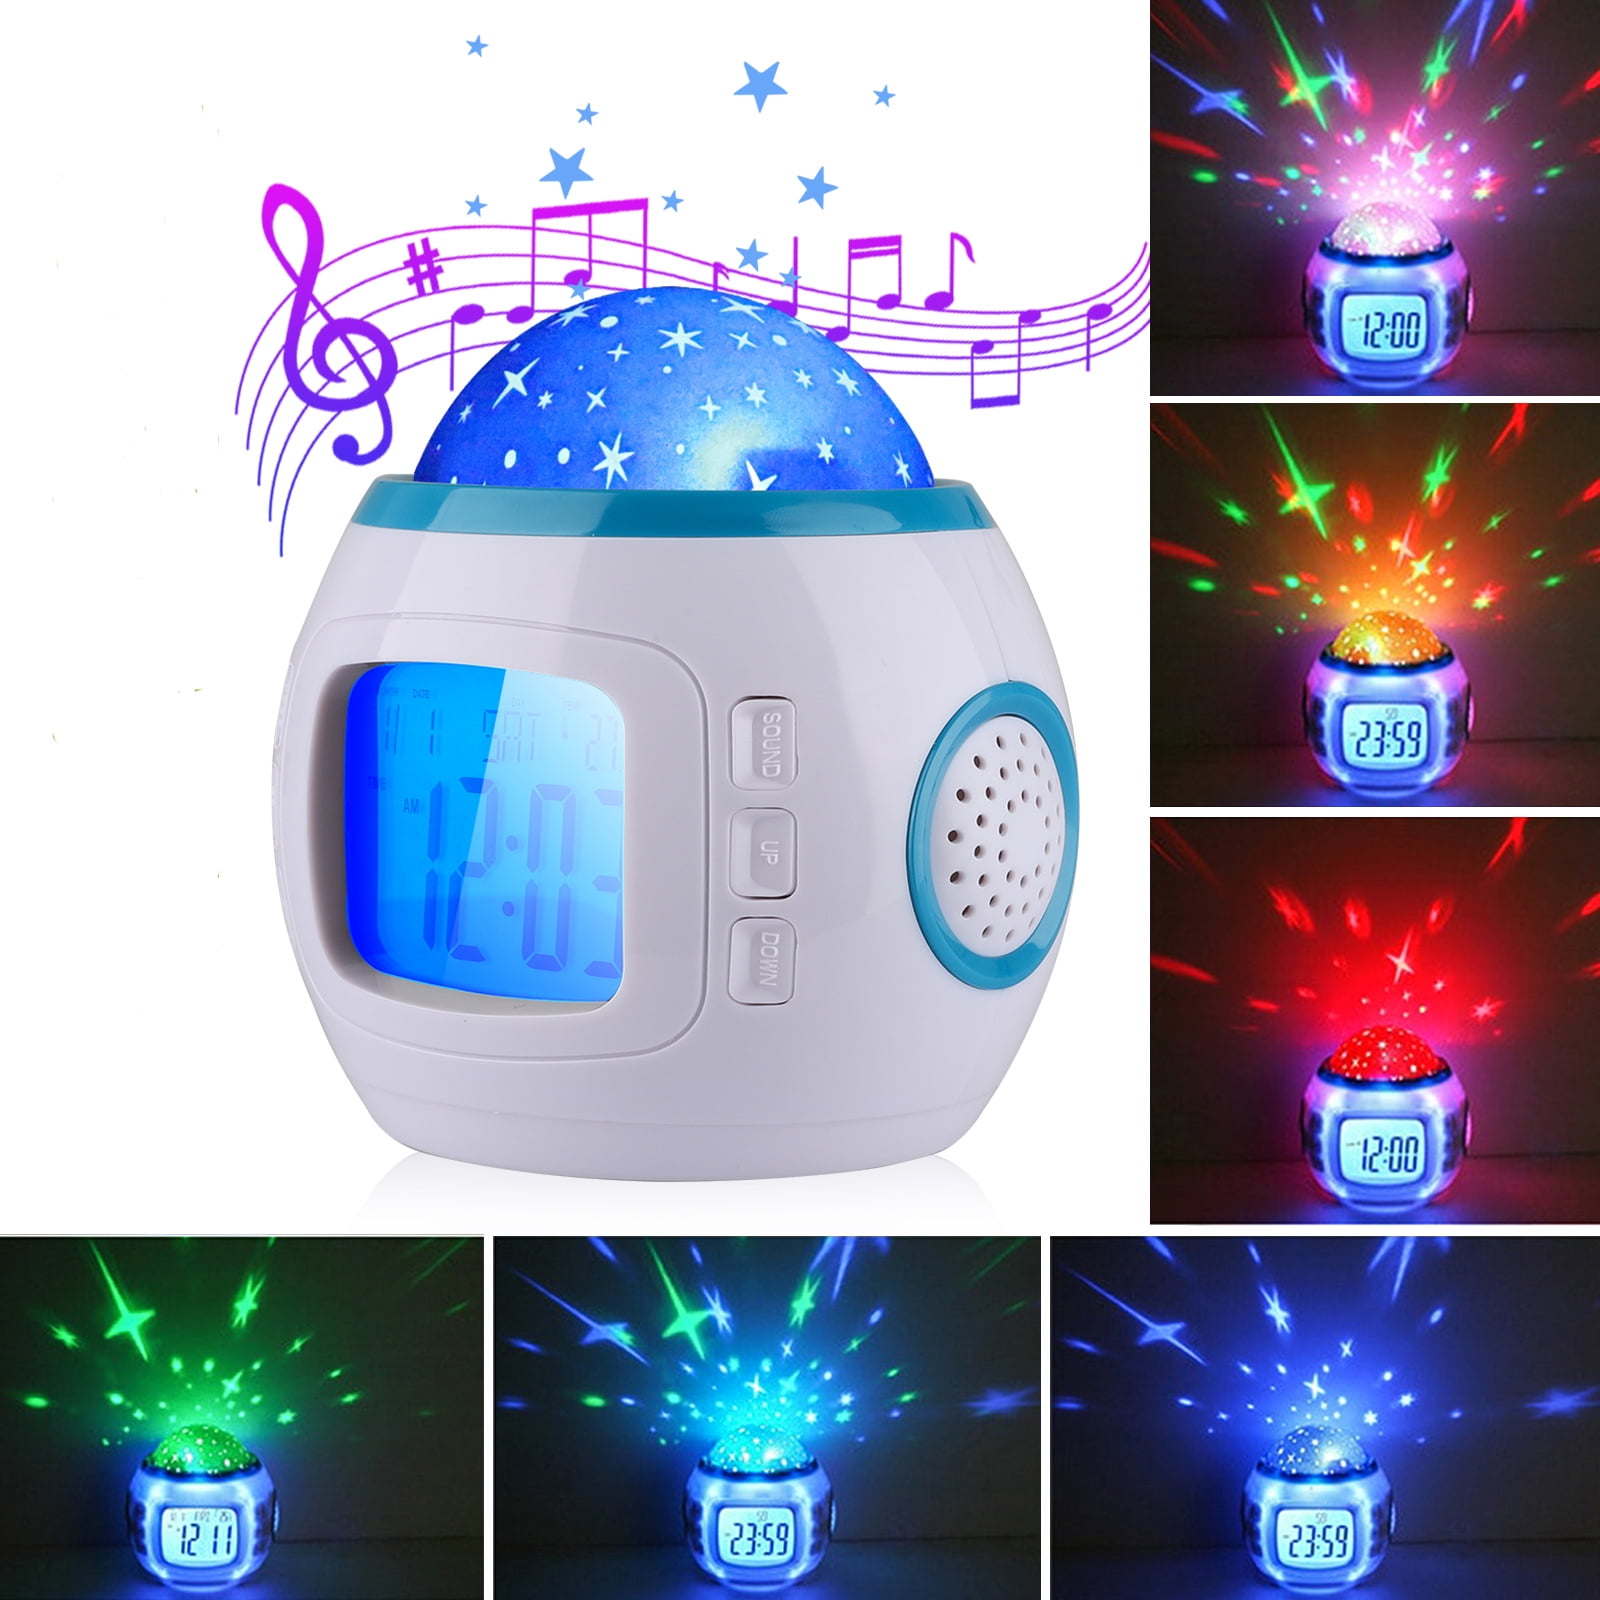 EEEkit Galaxy Digital Alarm Clock, Kids Soothing Star Projector Sound Machine, Relaxing Star Sky Night Light Alarm with Natural Sound & White Noise, Kid Baby Ceiling Projection Alarm Clock Lamp -